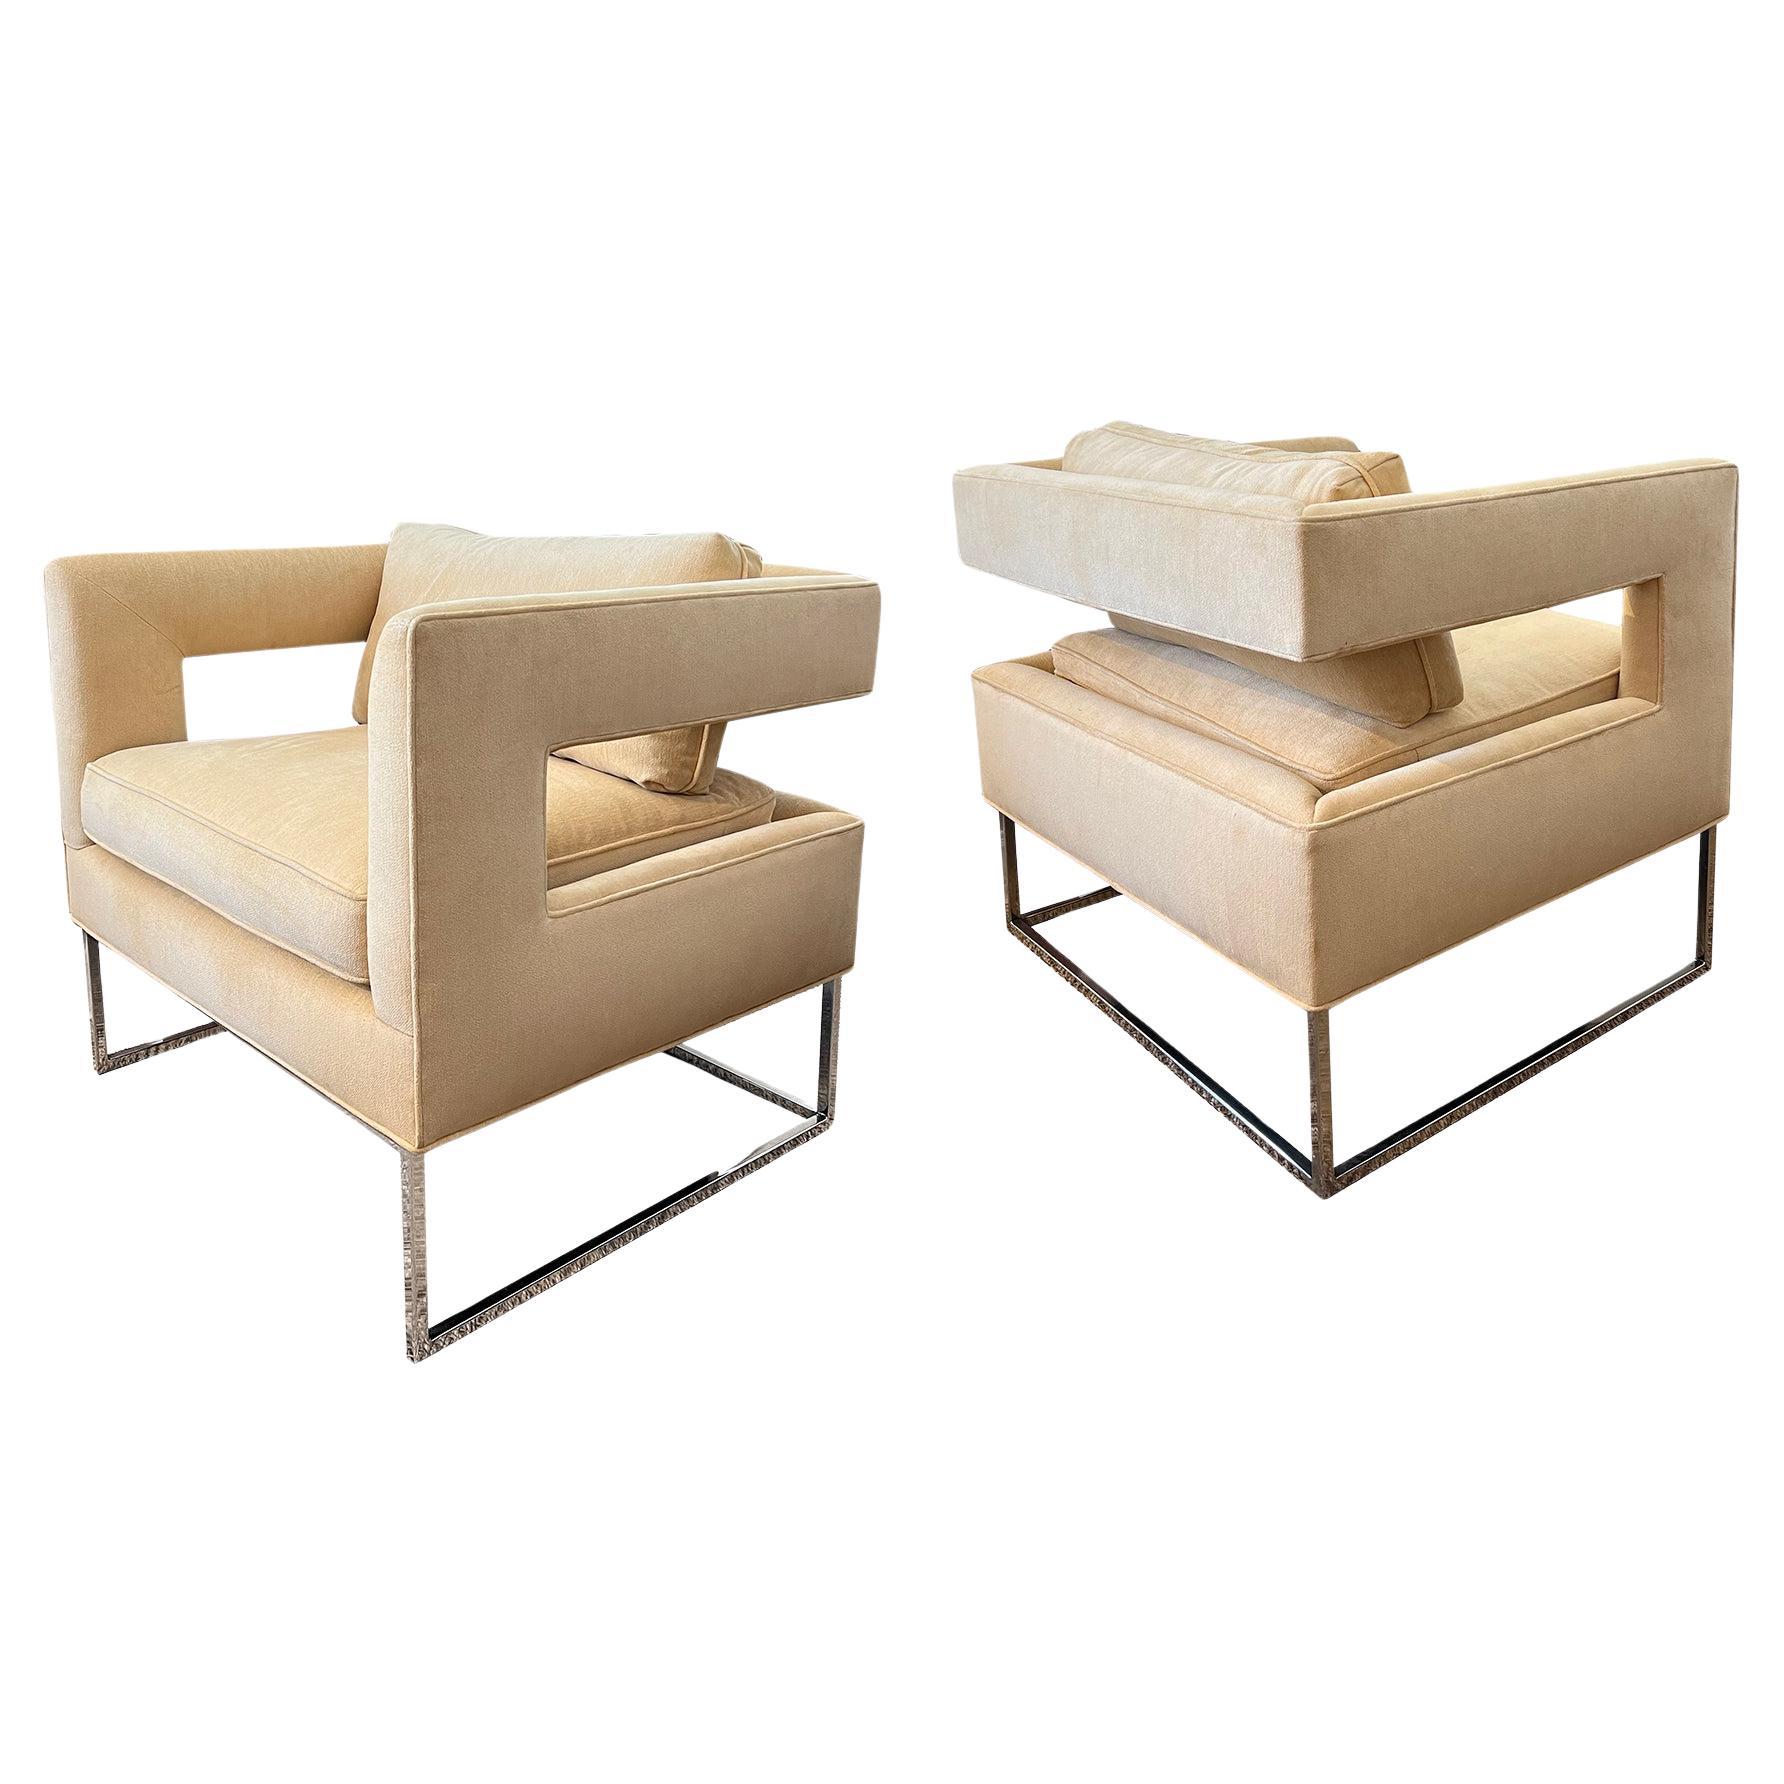 A Stylish Pair of Milo Baughman for Thayer Coggin Open-Back Cut-Out Chairs For Sale